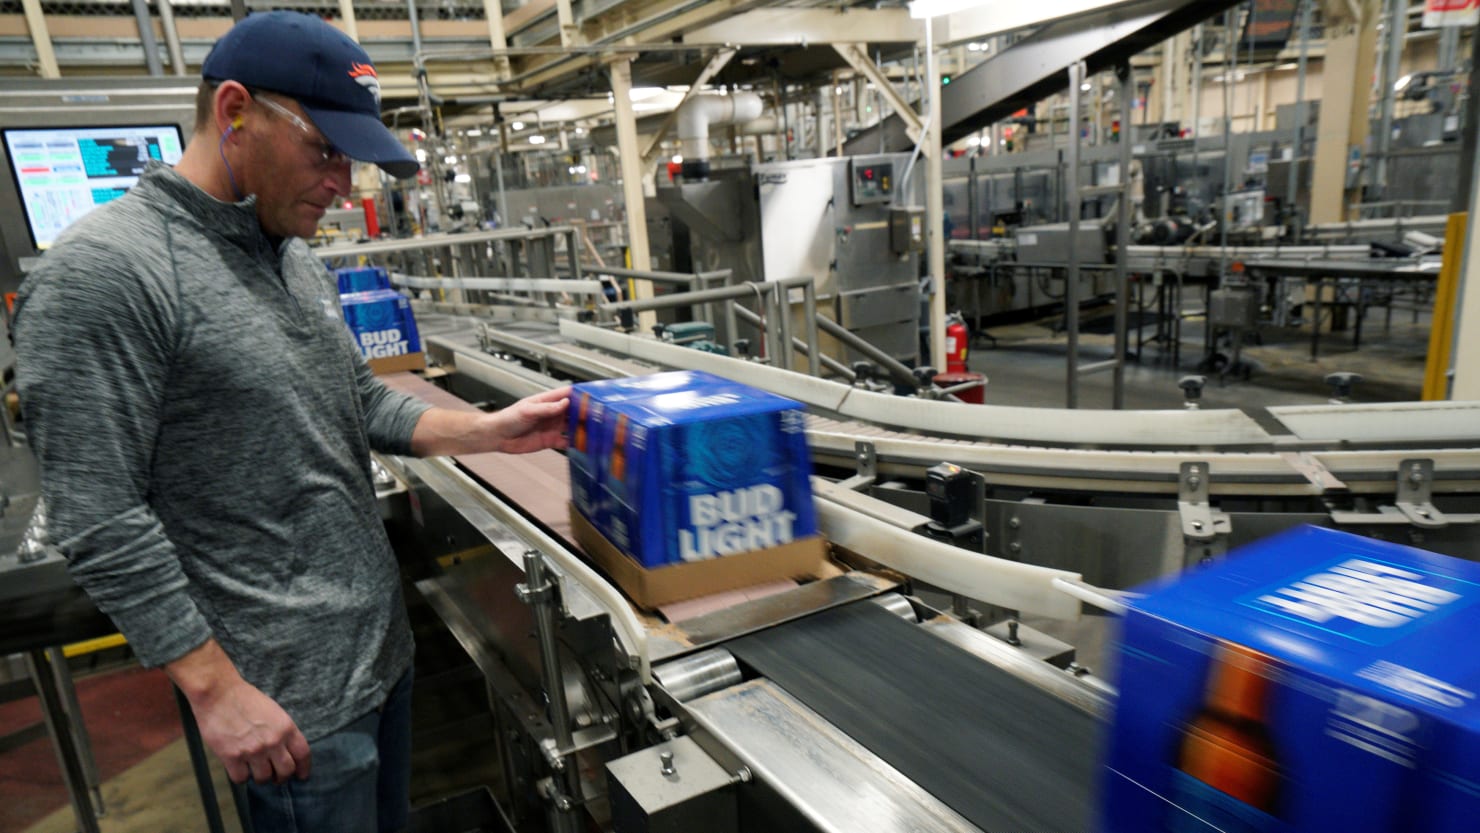 Bud Light Drama Caused 27 Billion Loss and Tanked AnheuserBusch Stock